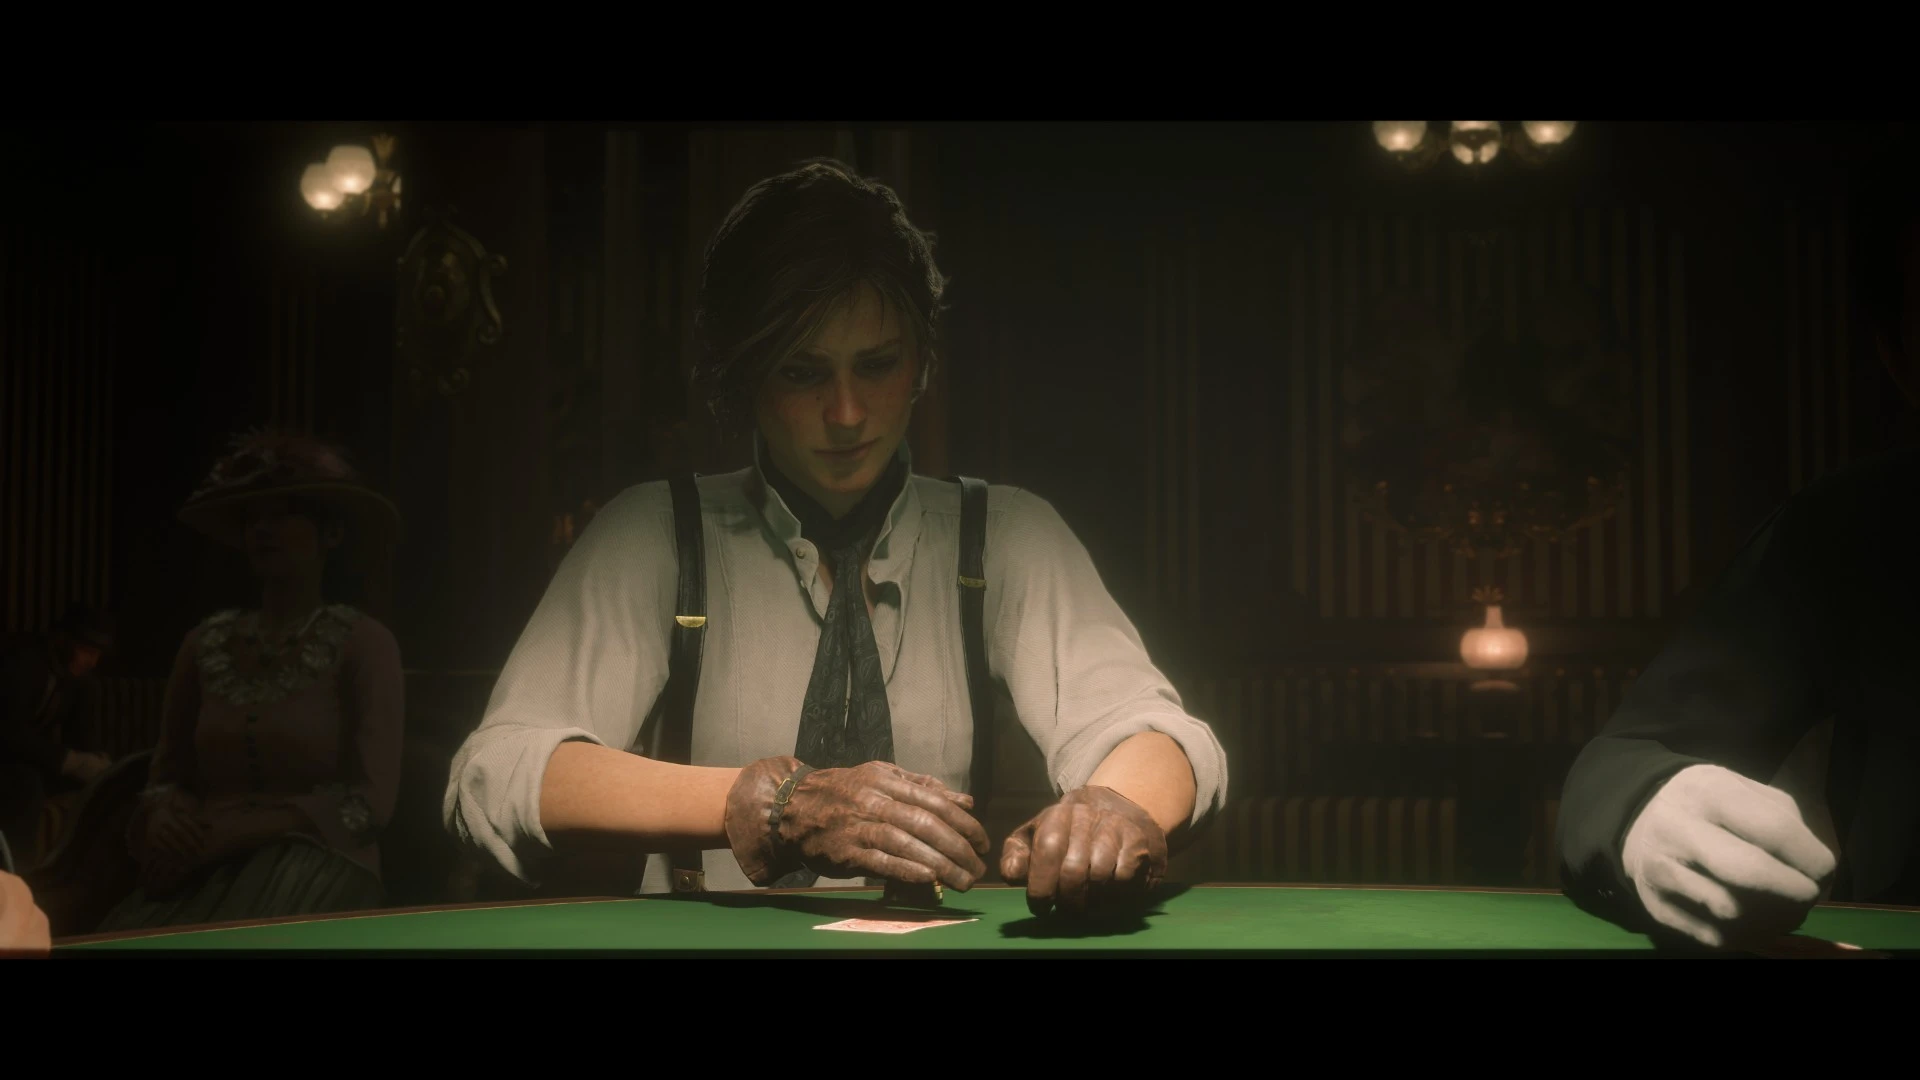 Sadie Adler Plays Poker at Red Dead Redemption 2 Nexus - Mods and community